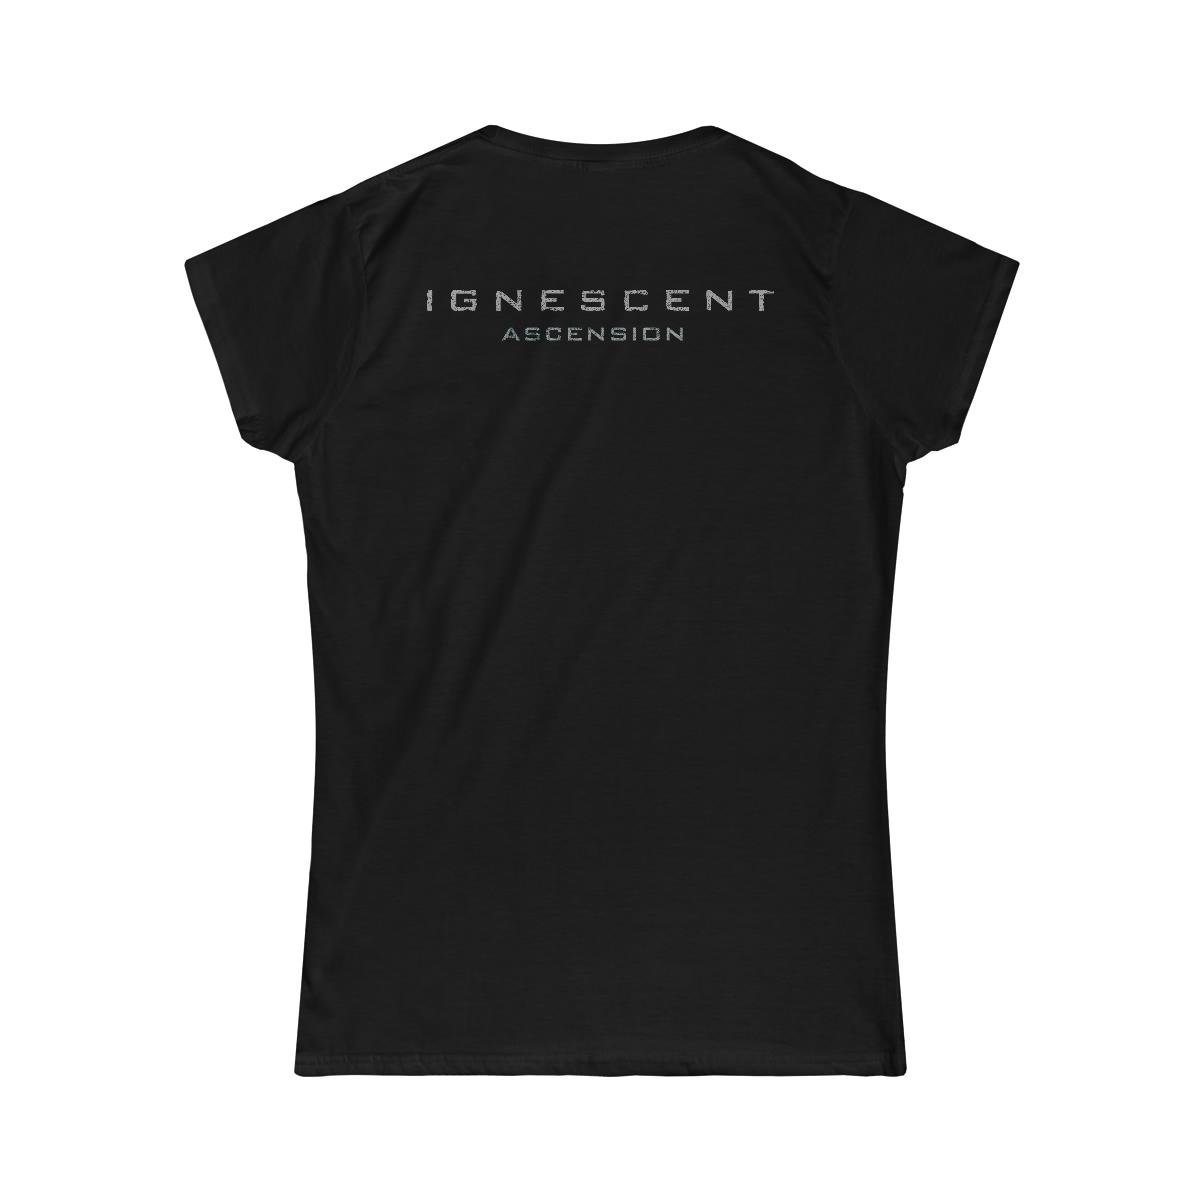 Ignescent – Ascension Women’s Short Sleeve Tshirt (2 Sided)